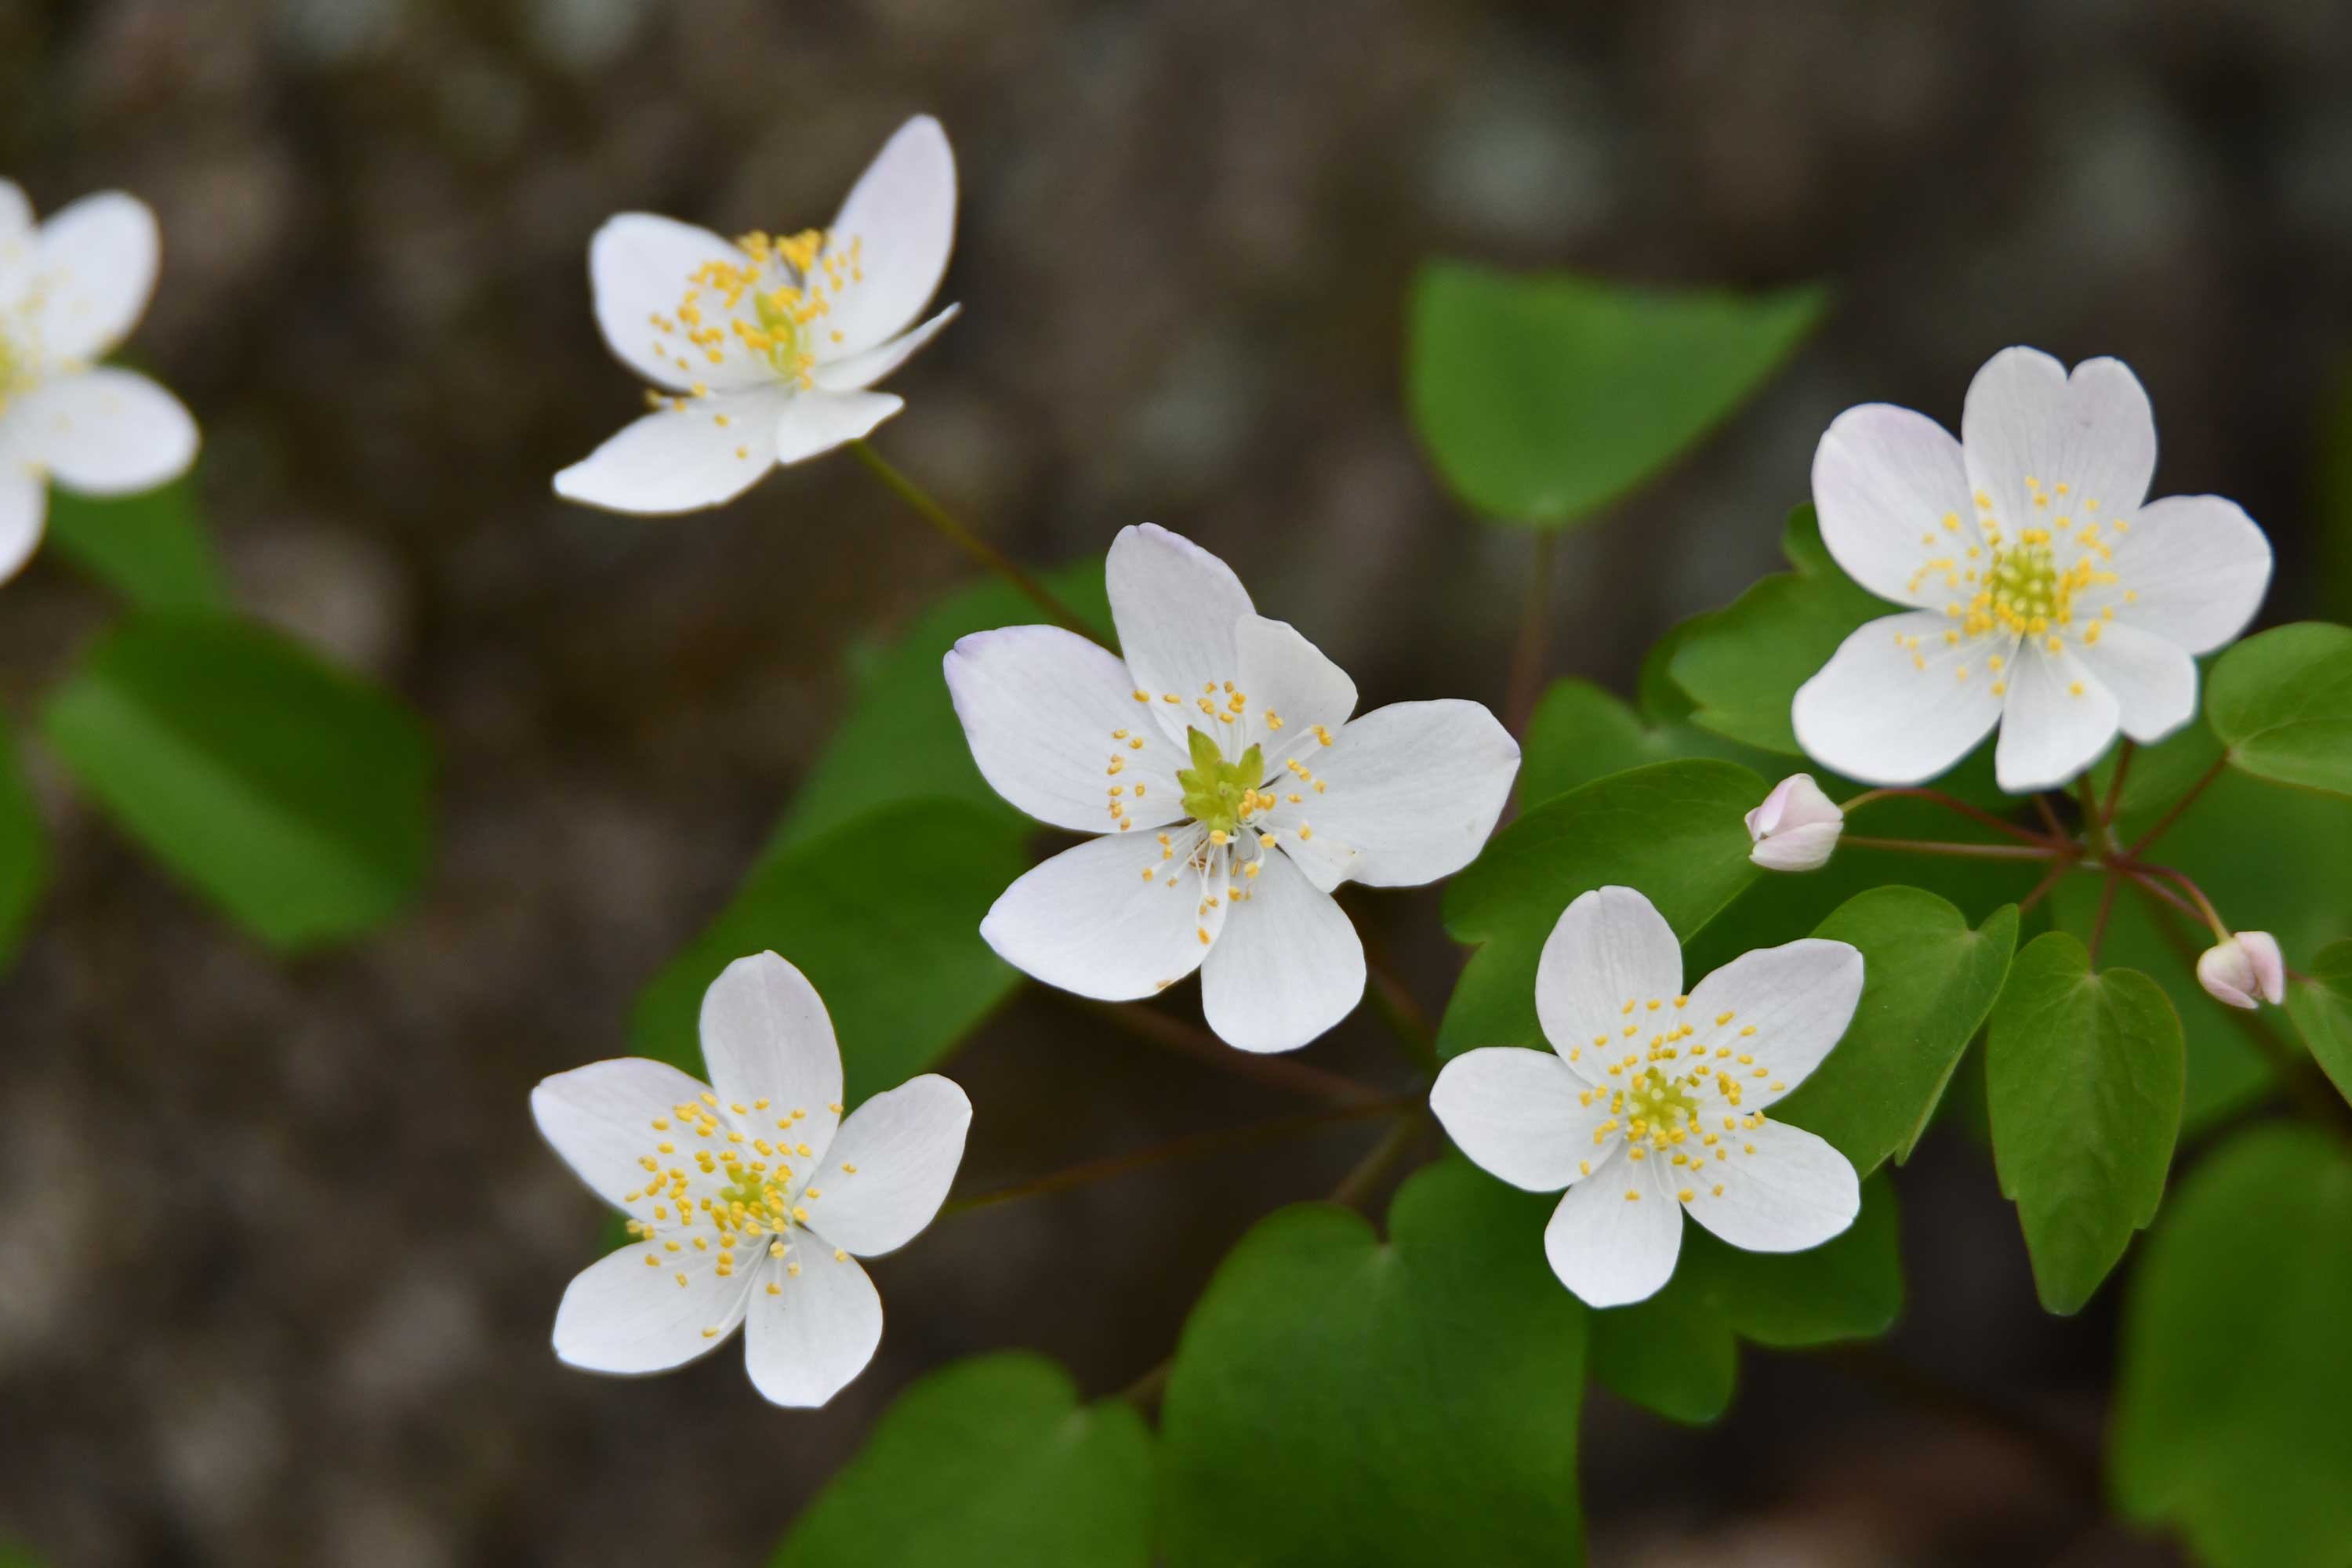 The white blooms of rue anemone.